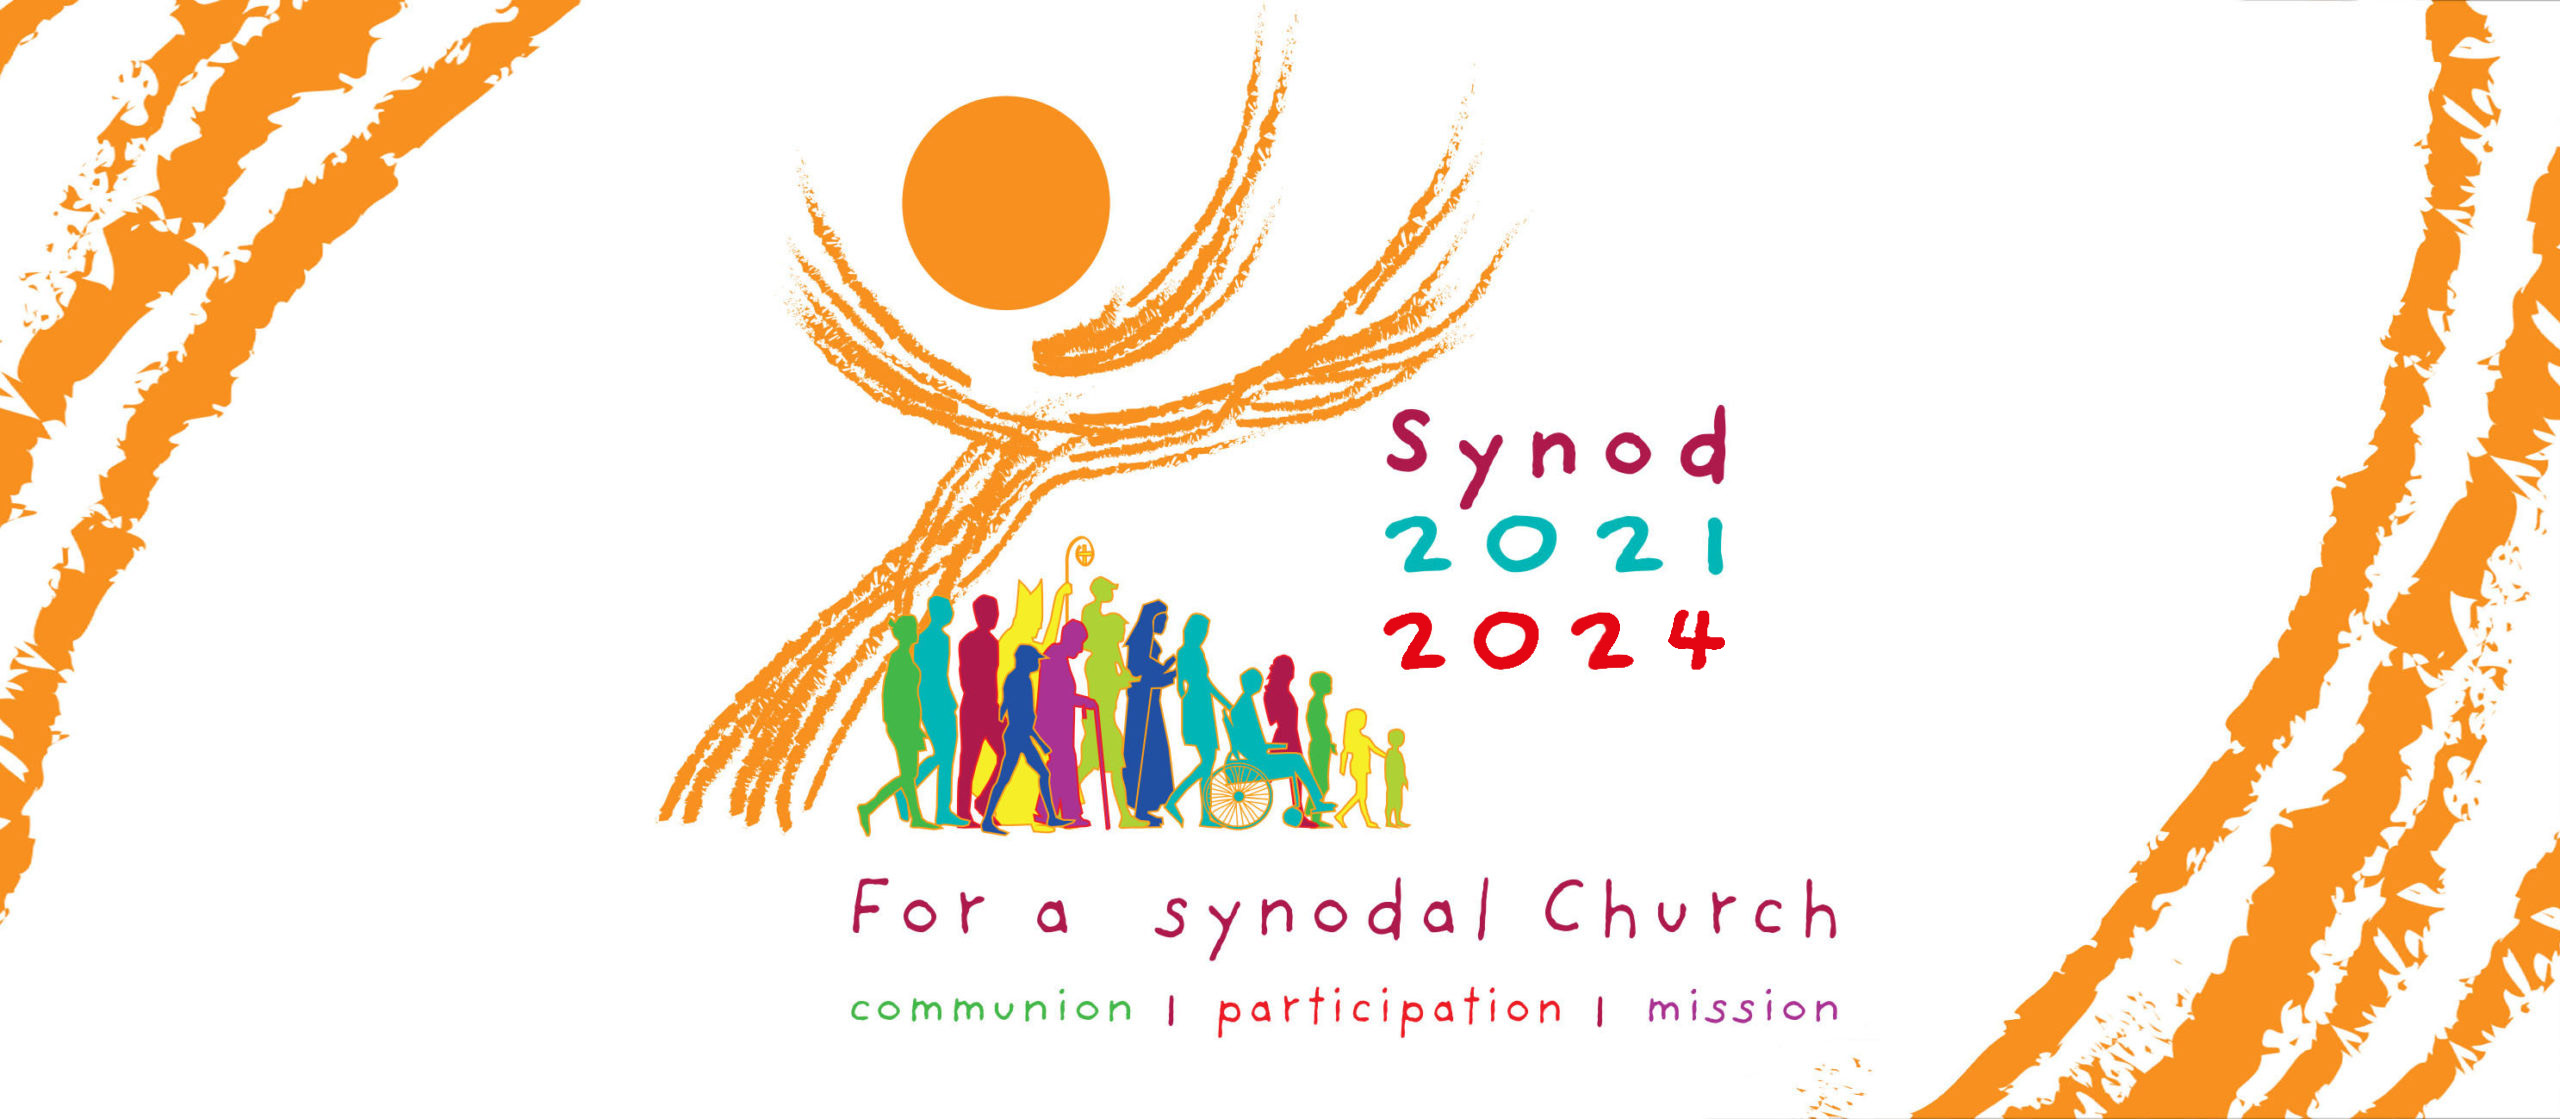 Synod 2021-2024: The Journey Continues